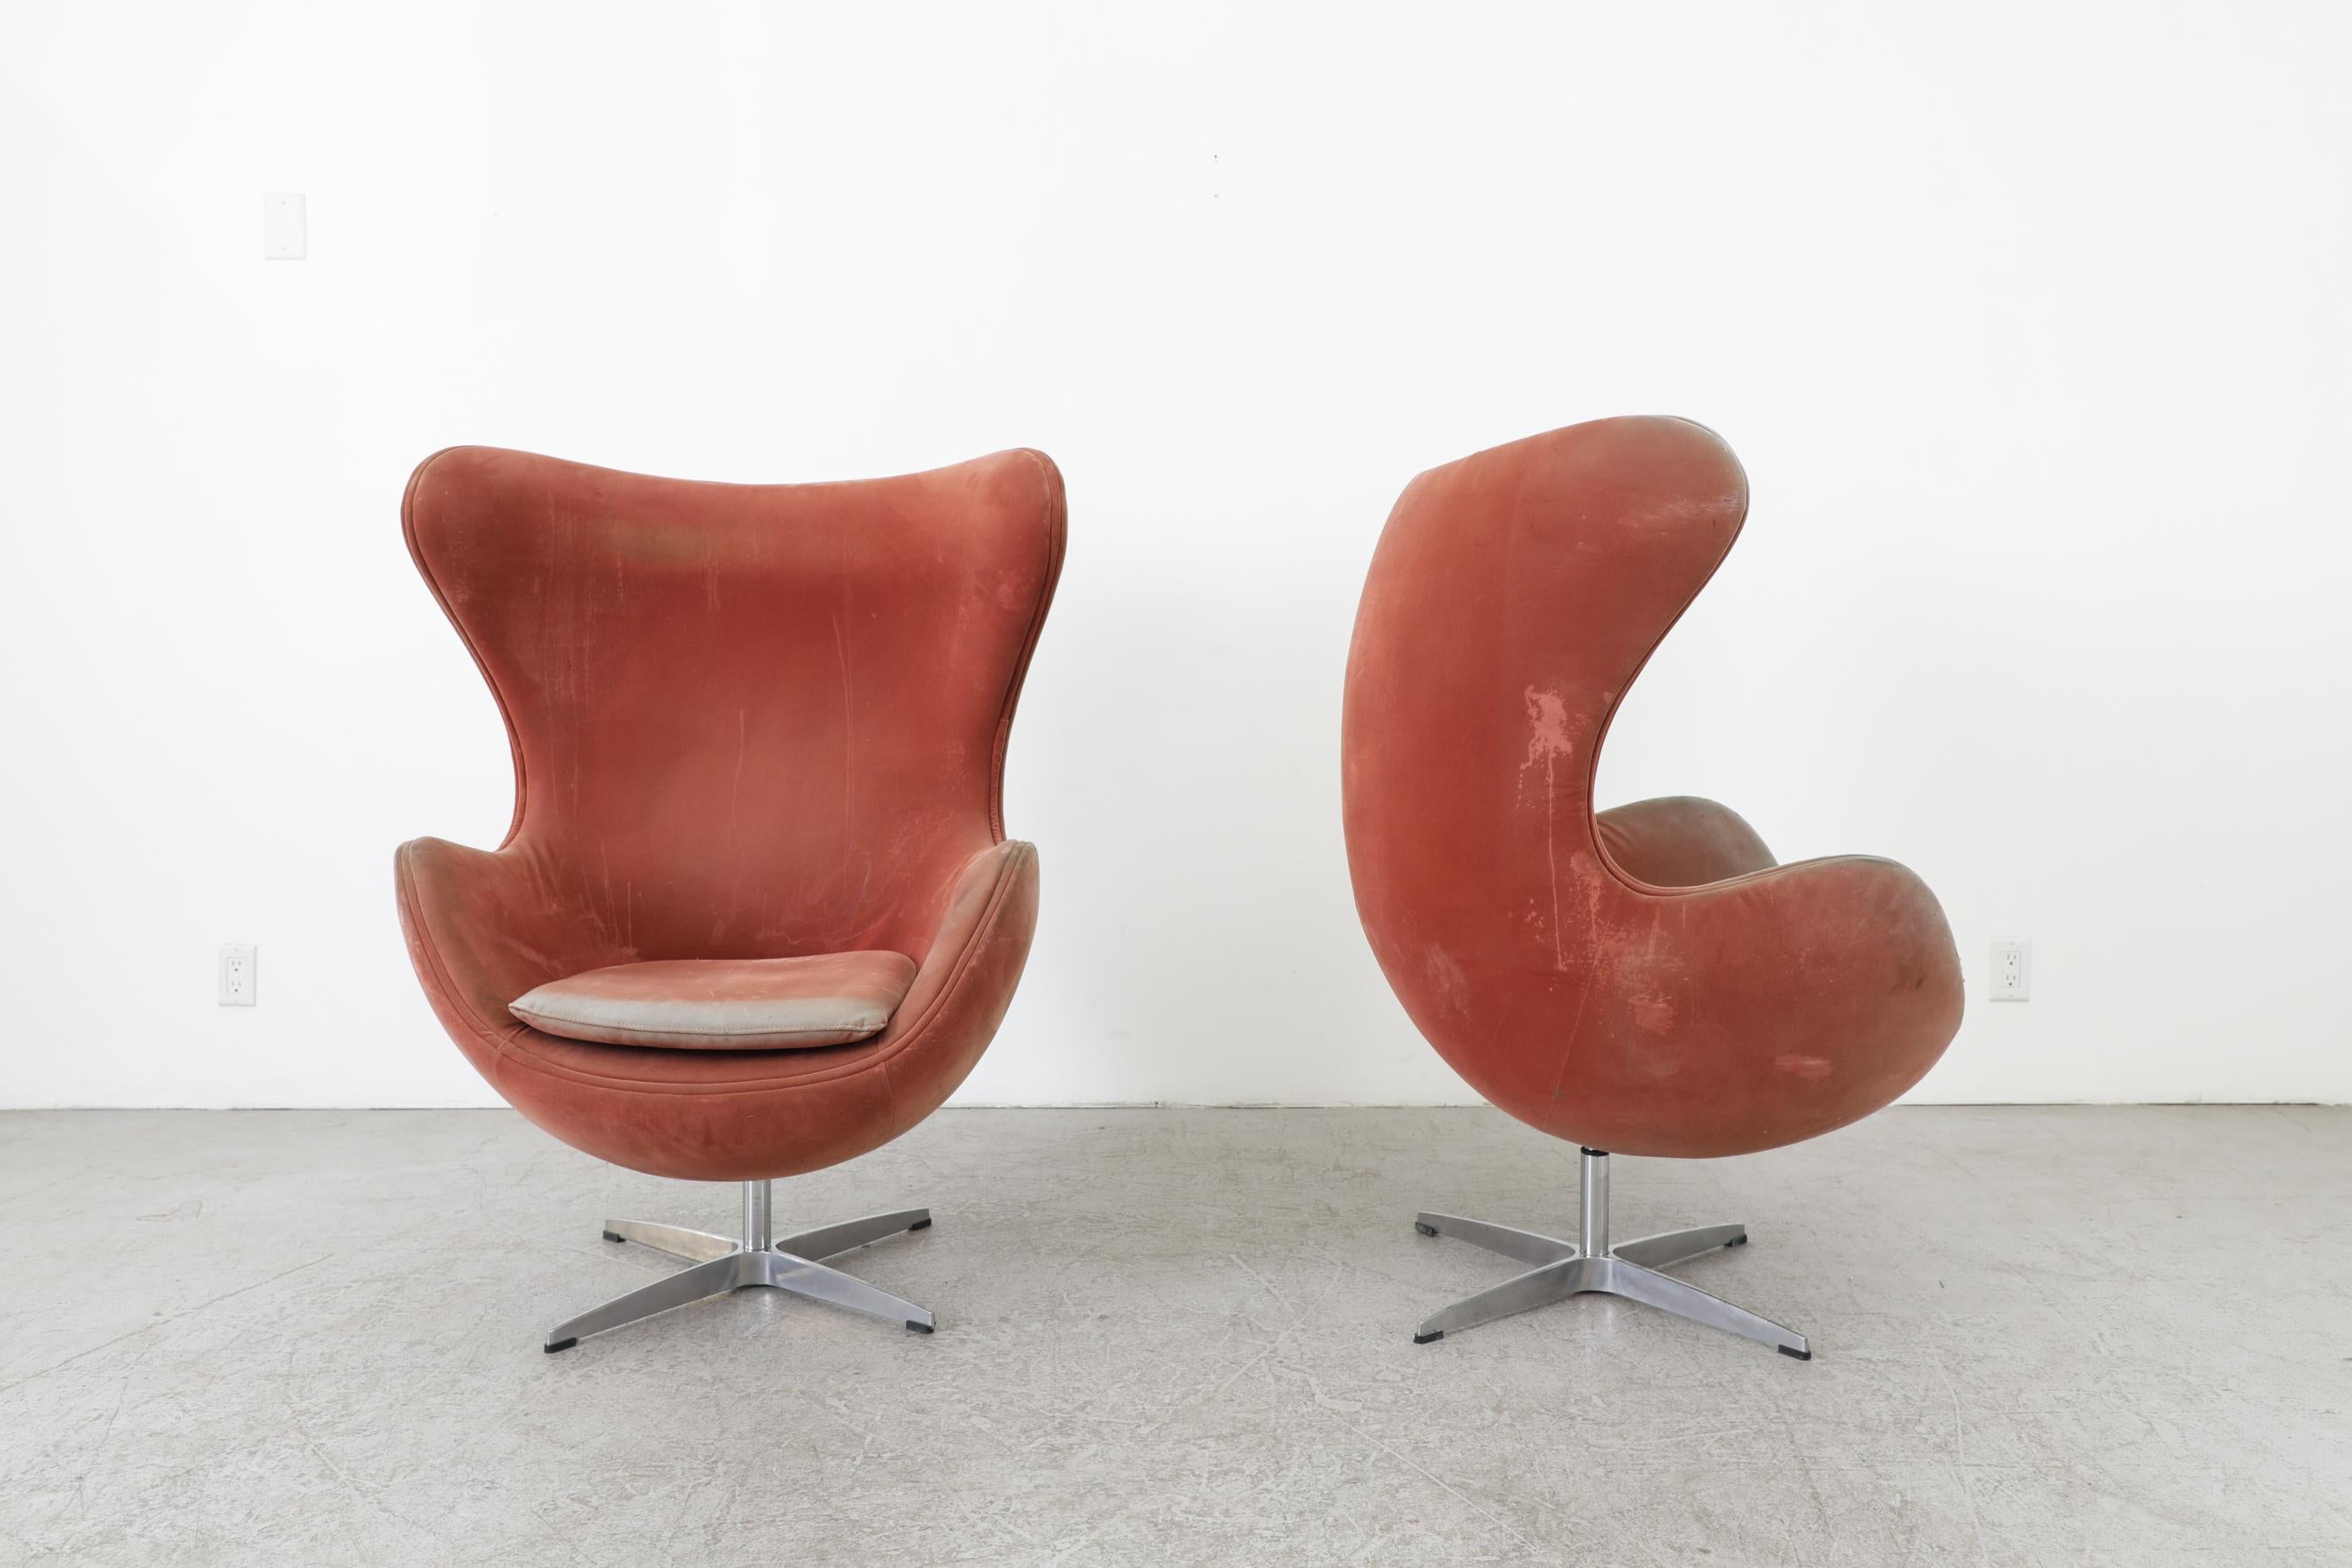 Mid-20th Century Pair of Original Arne Jacobsen (attributed) Egg Chairs, 1958